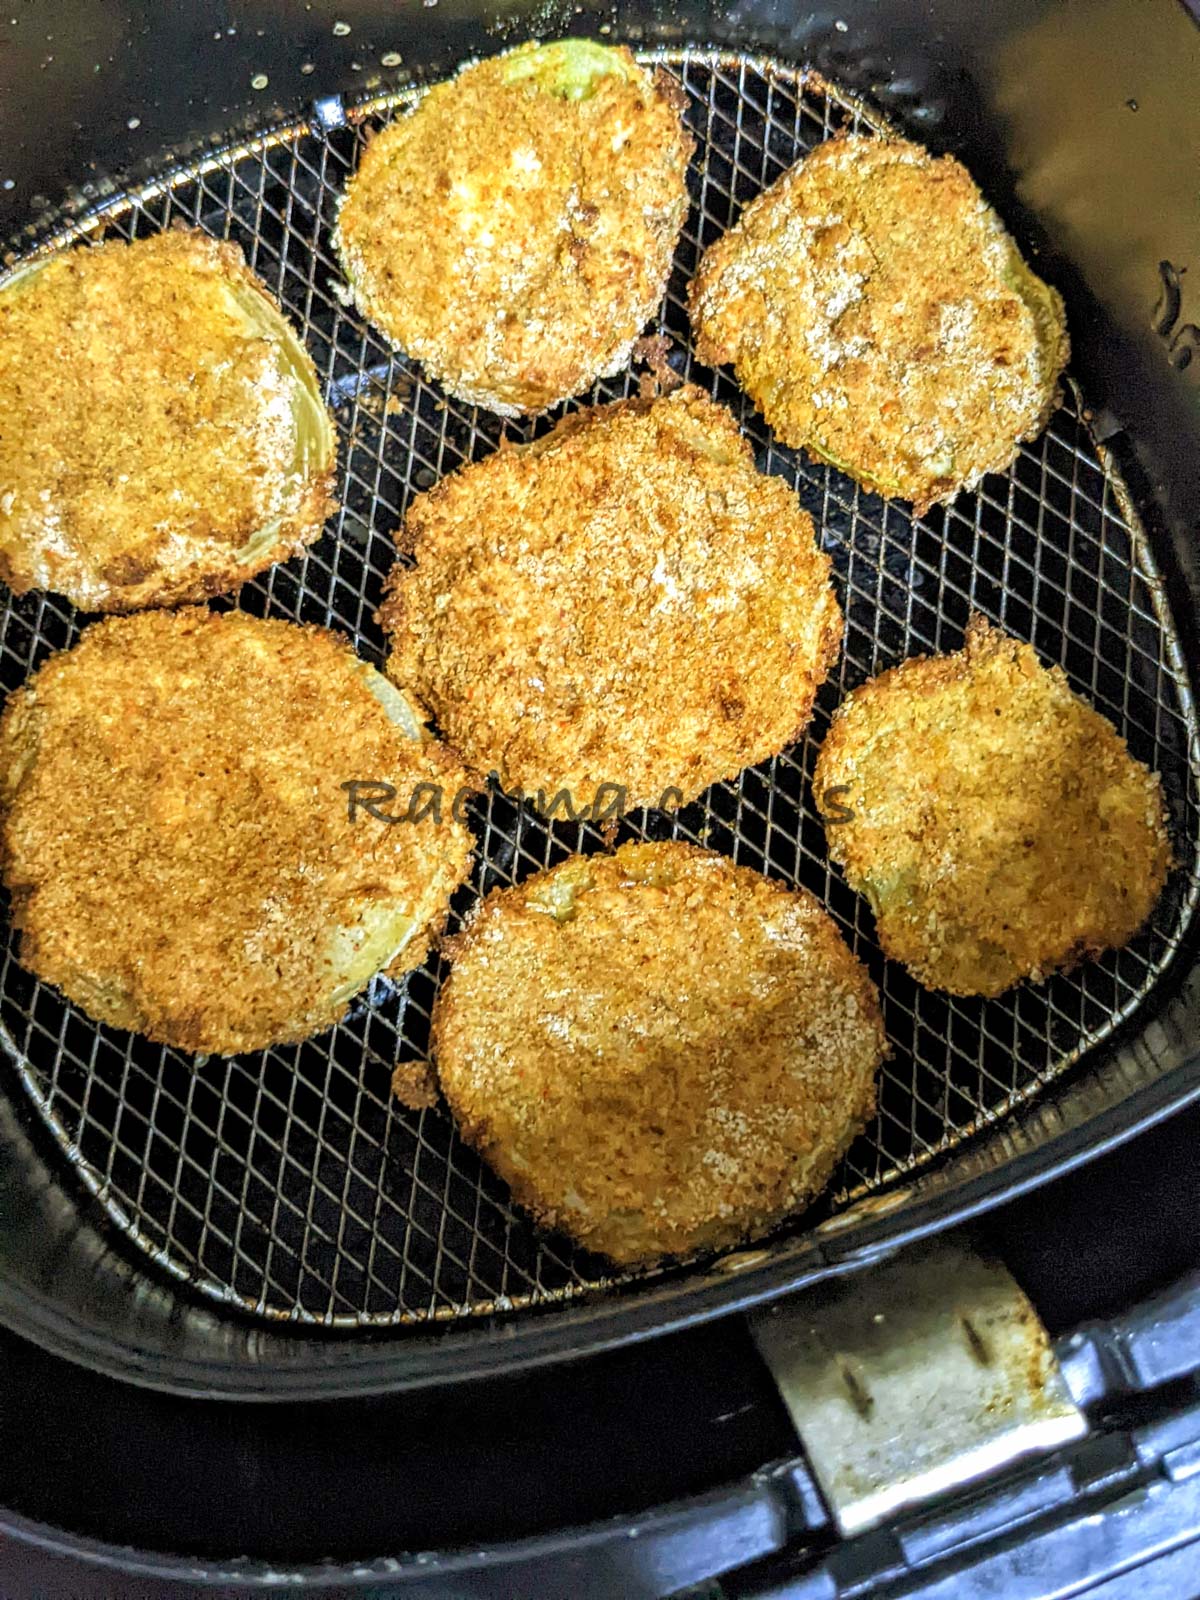 Browned and air fried green tomatoes in air fryer basket.